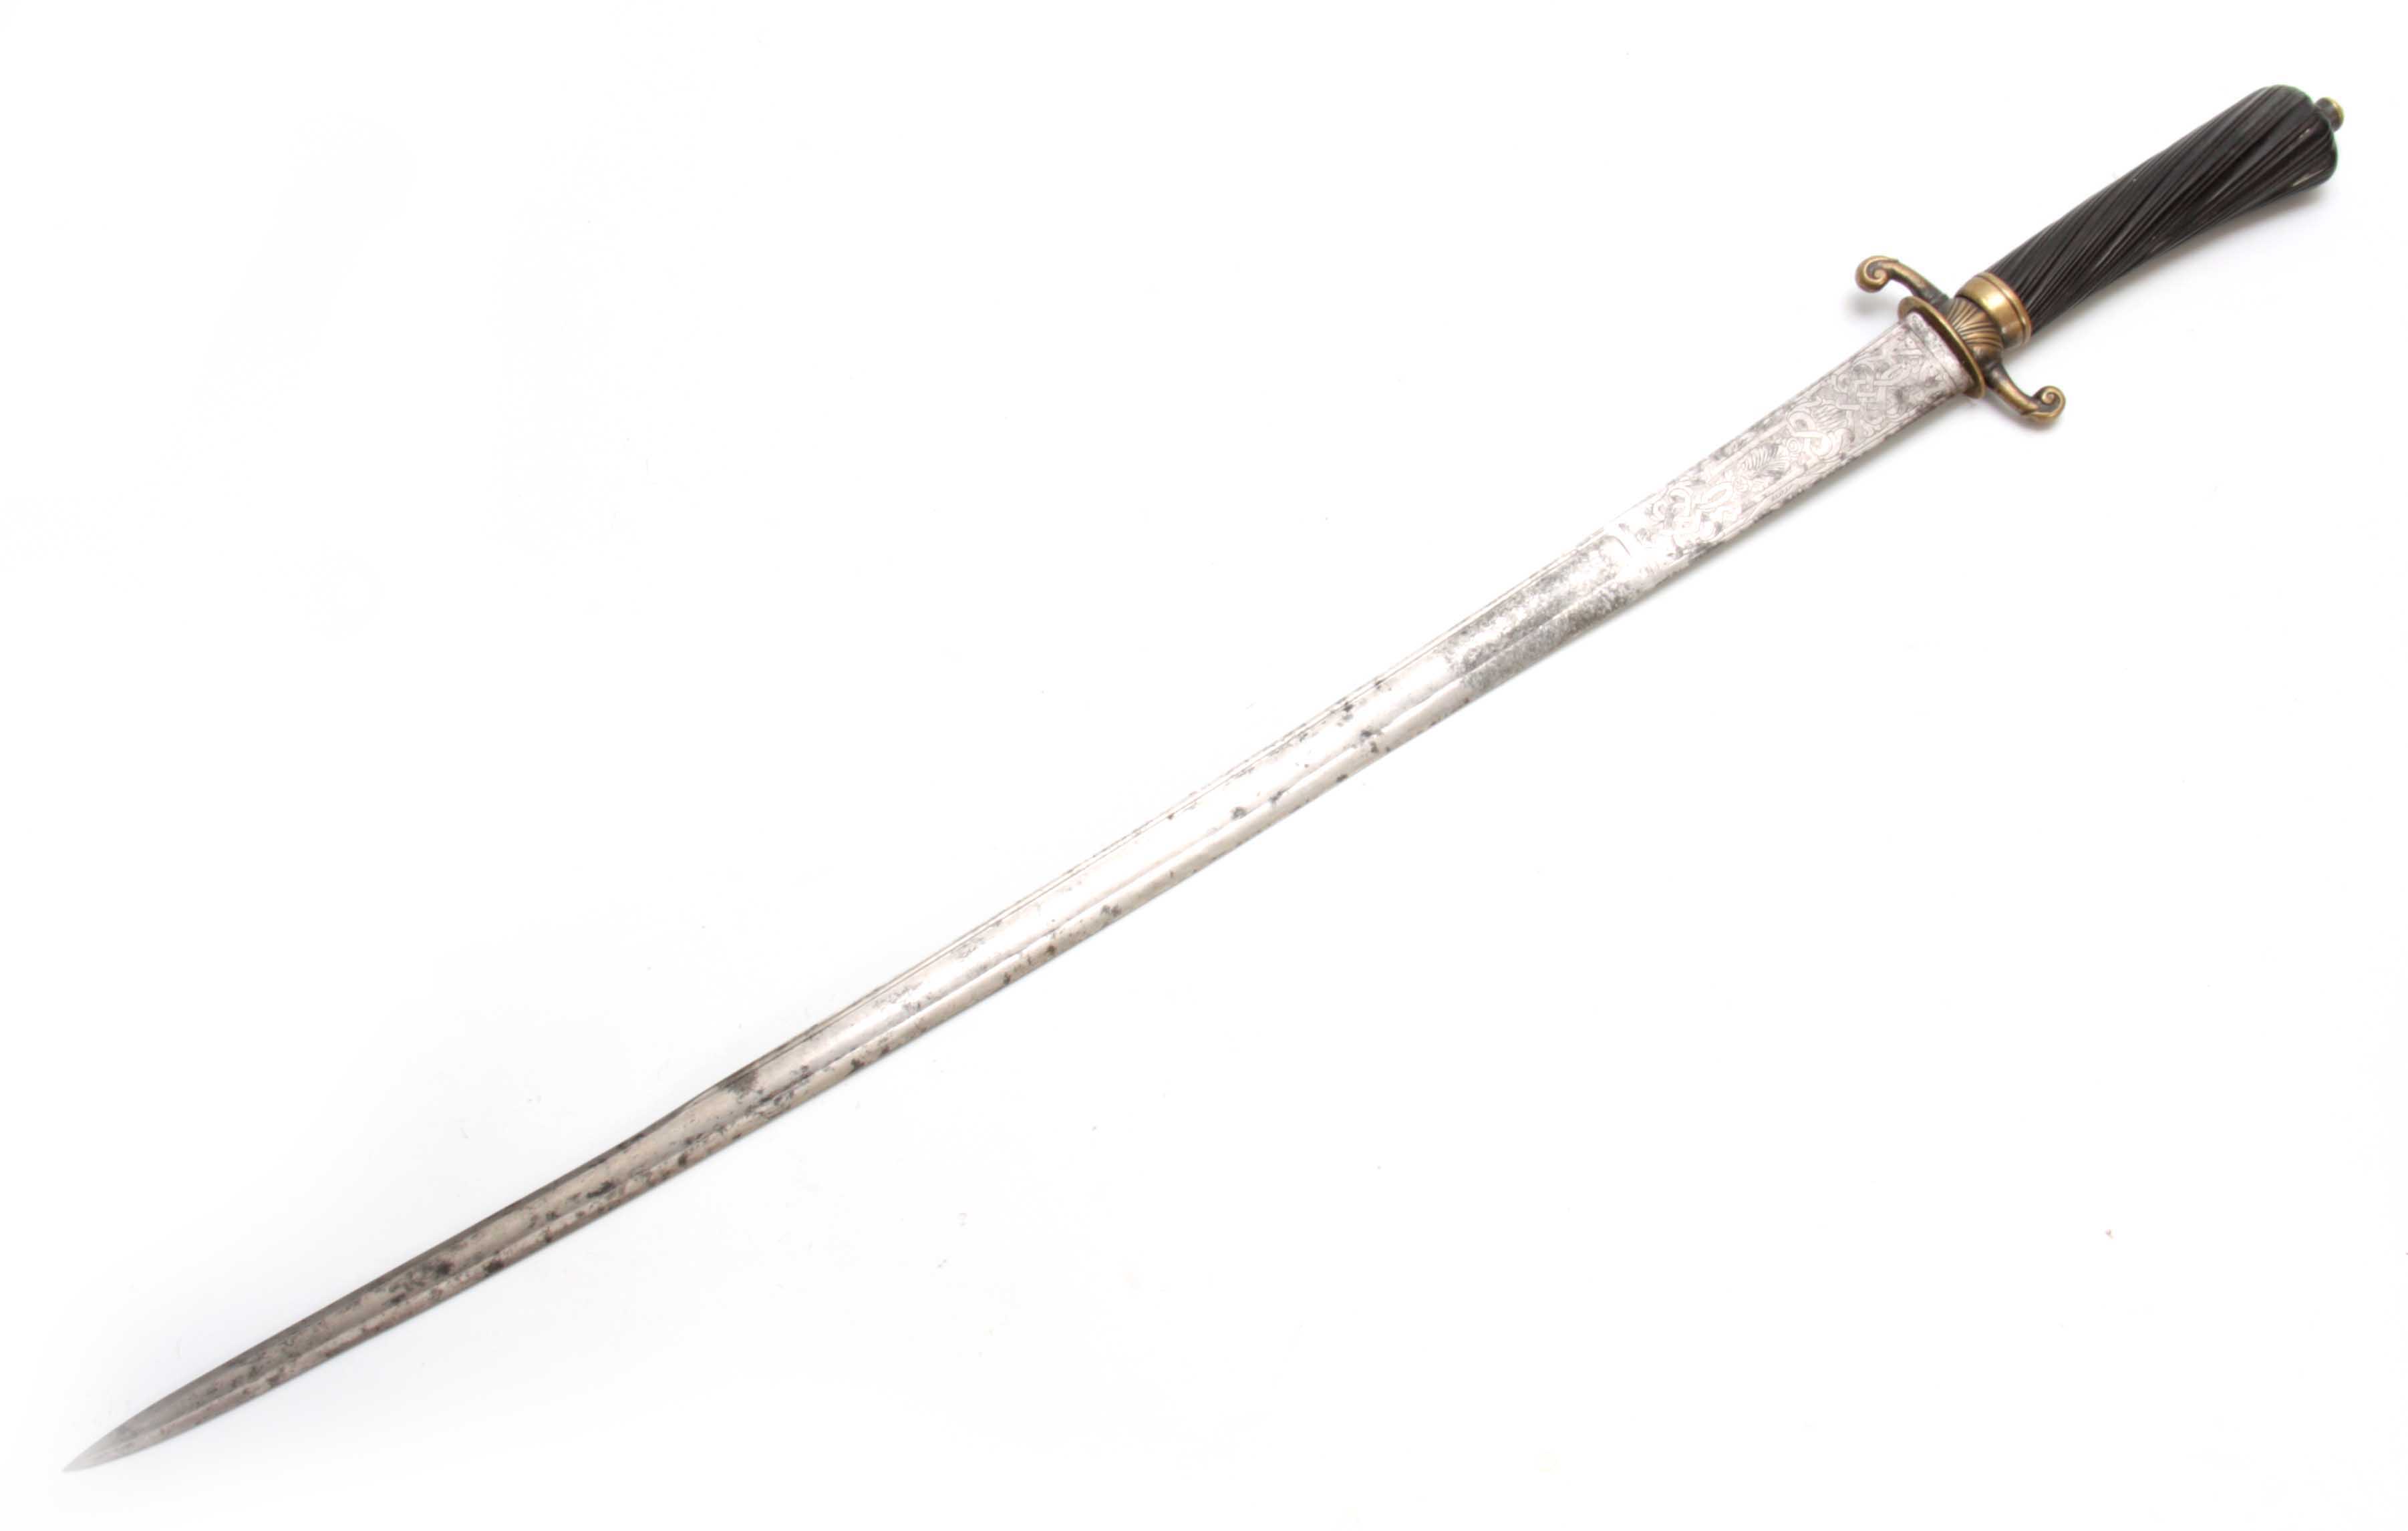 A MID 18th CENTURY FRENCH HANGER SWORD having a twisted fluted ebony grip with brass quillon on a